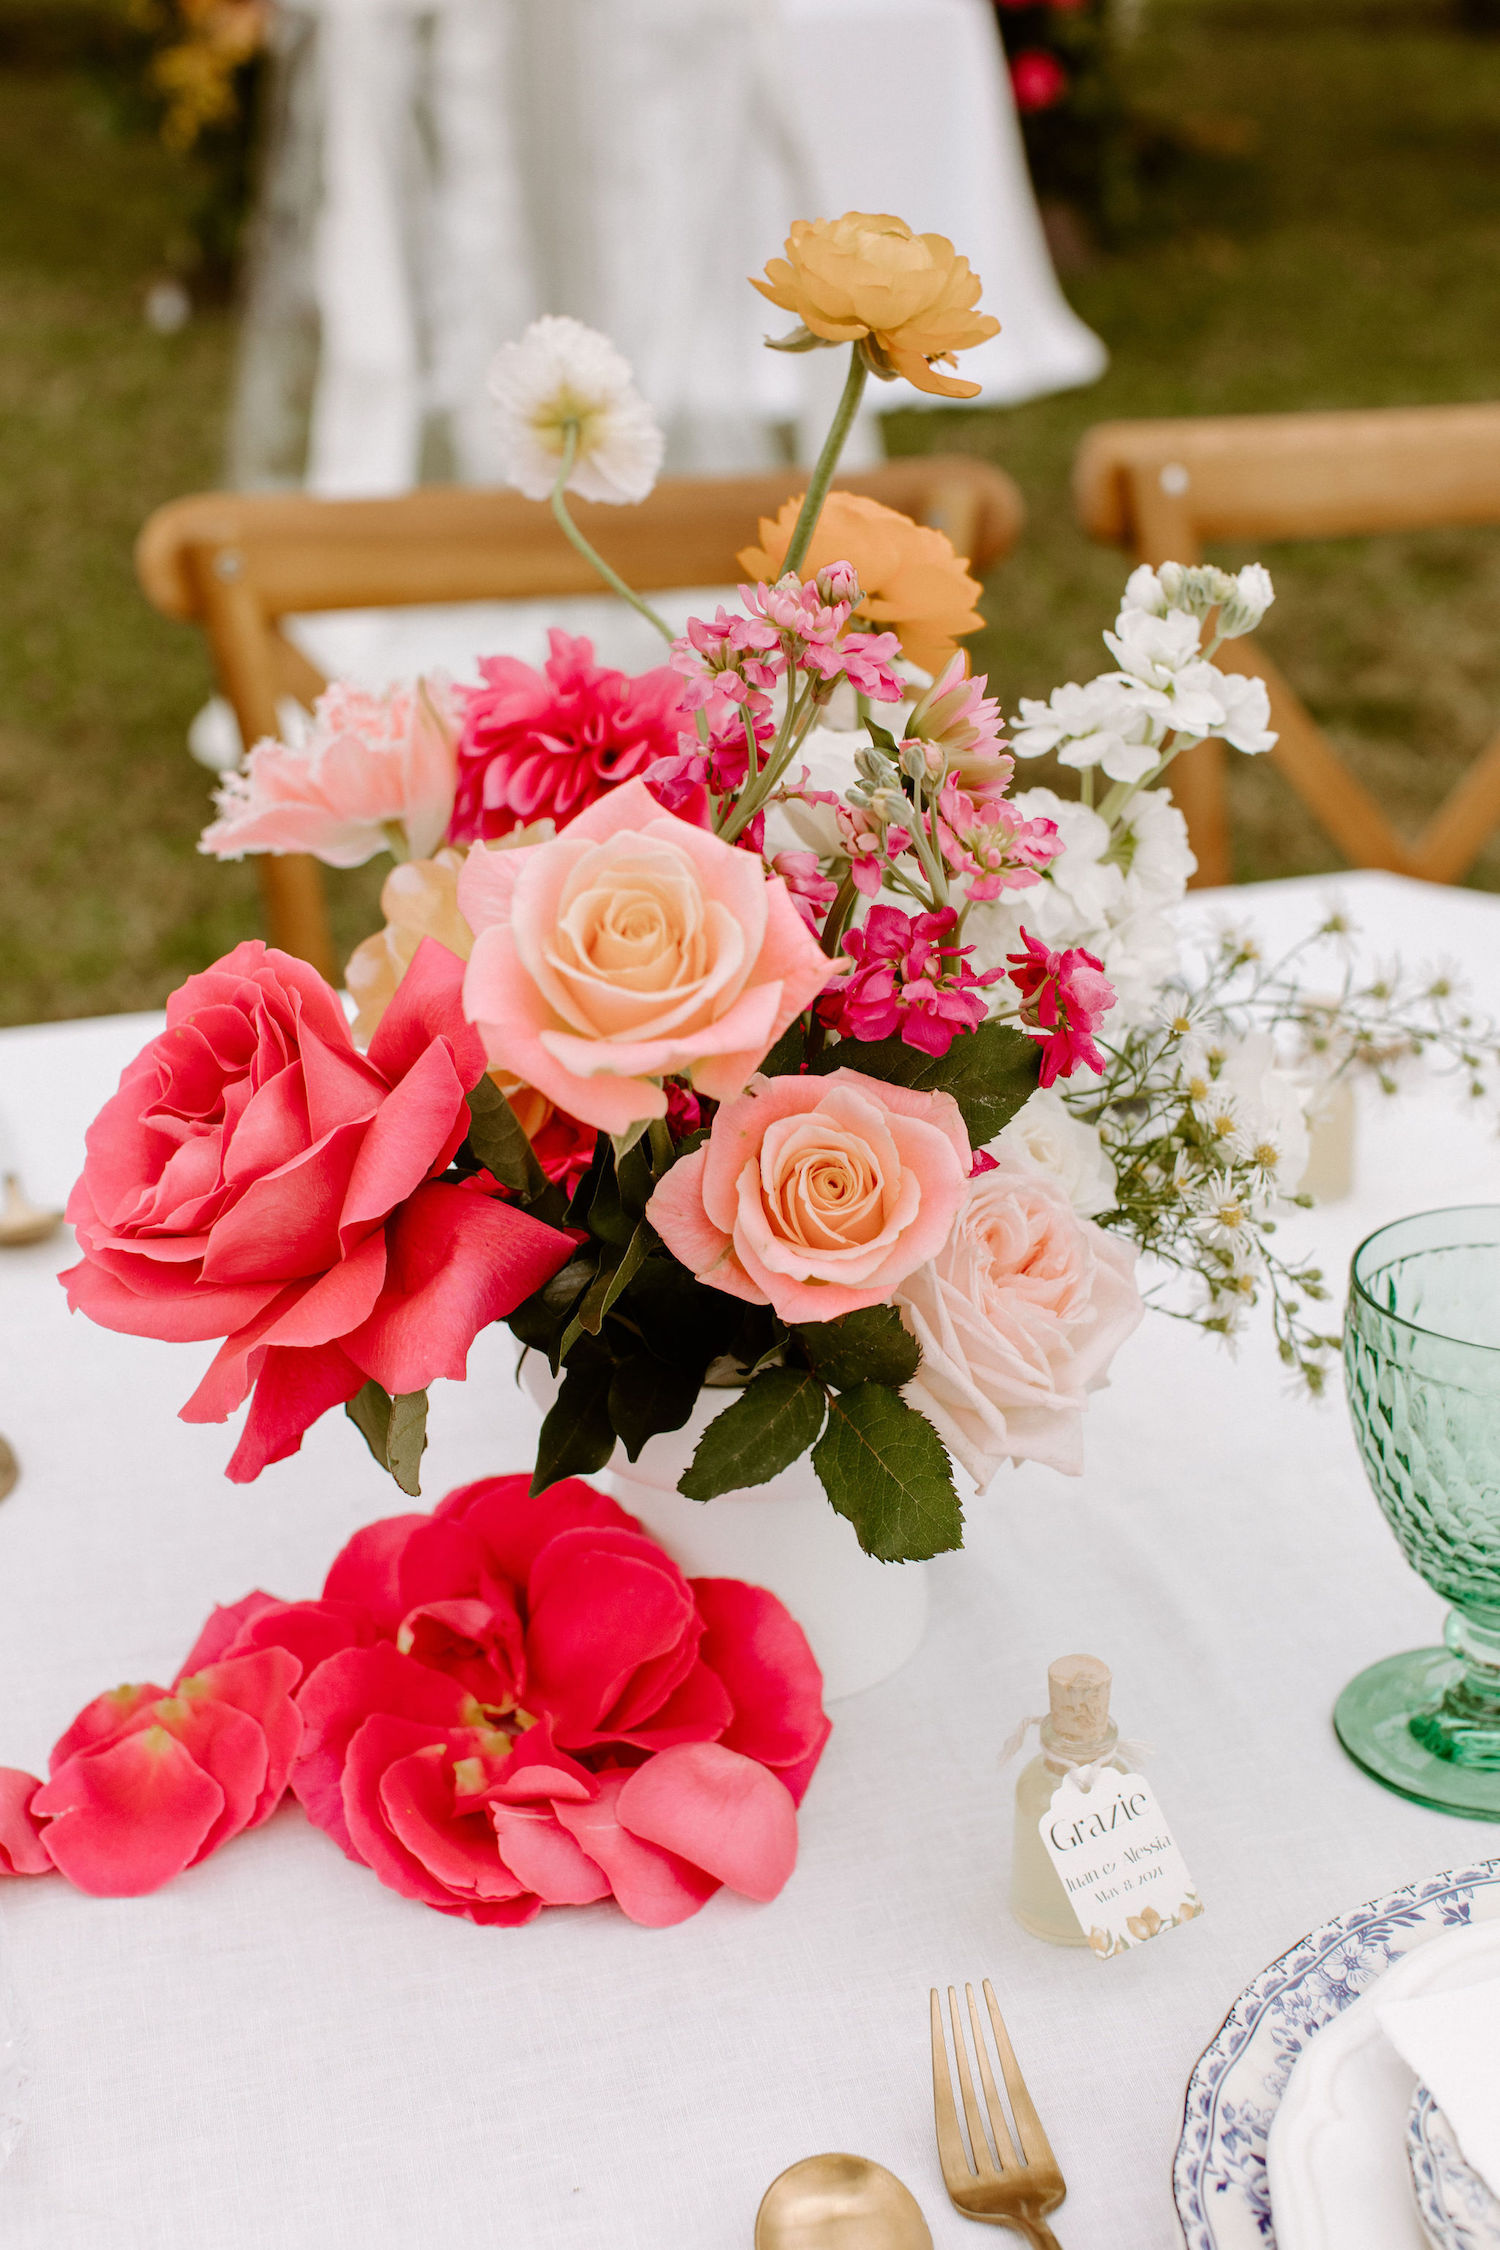 Vibrant blooms freshly picked for this garden party wedding